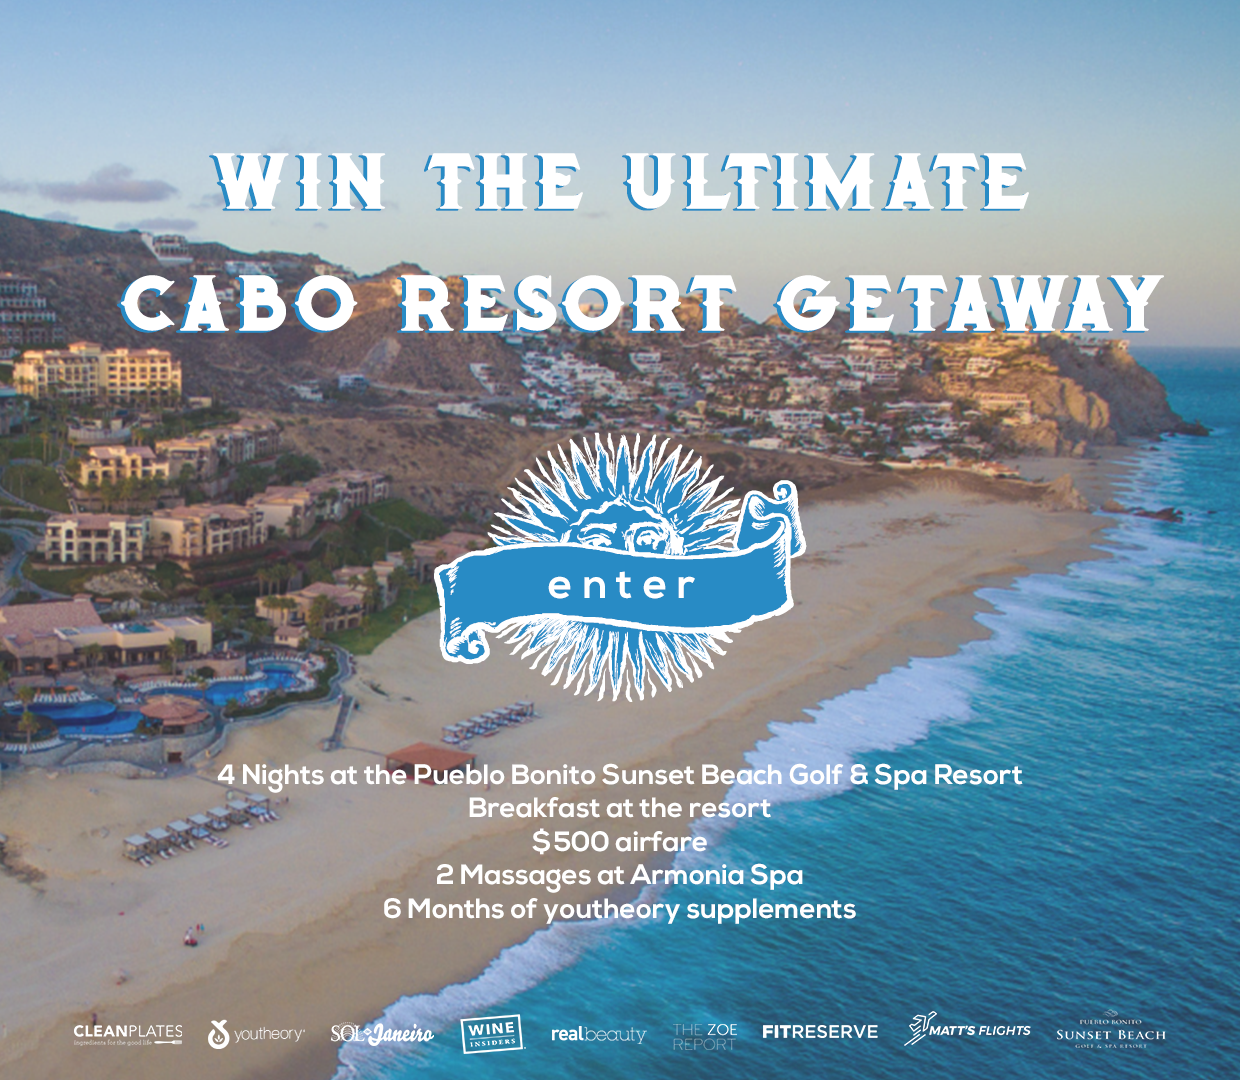 Win the Ultimate Beach, Golf & Spa Cabo Getaway! Enter for a chance to win four nights for two at the Pueblo Bonito Sunset Beach Golf & Spa Resort, $500 airfare credit, two 50-minute massages at Armonia Spa, daily breakfast at the Resort, a $300 Sol de Janeiro gift card, and a 6-month supply of Youtheory supplements!